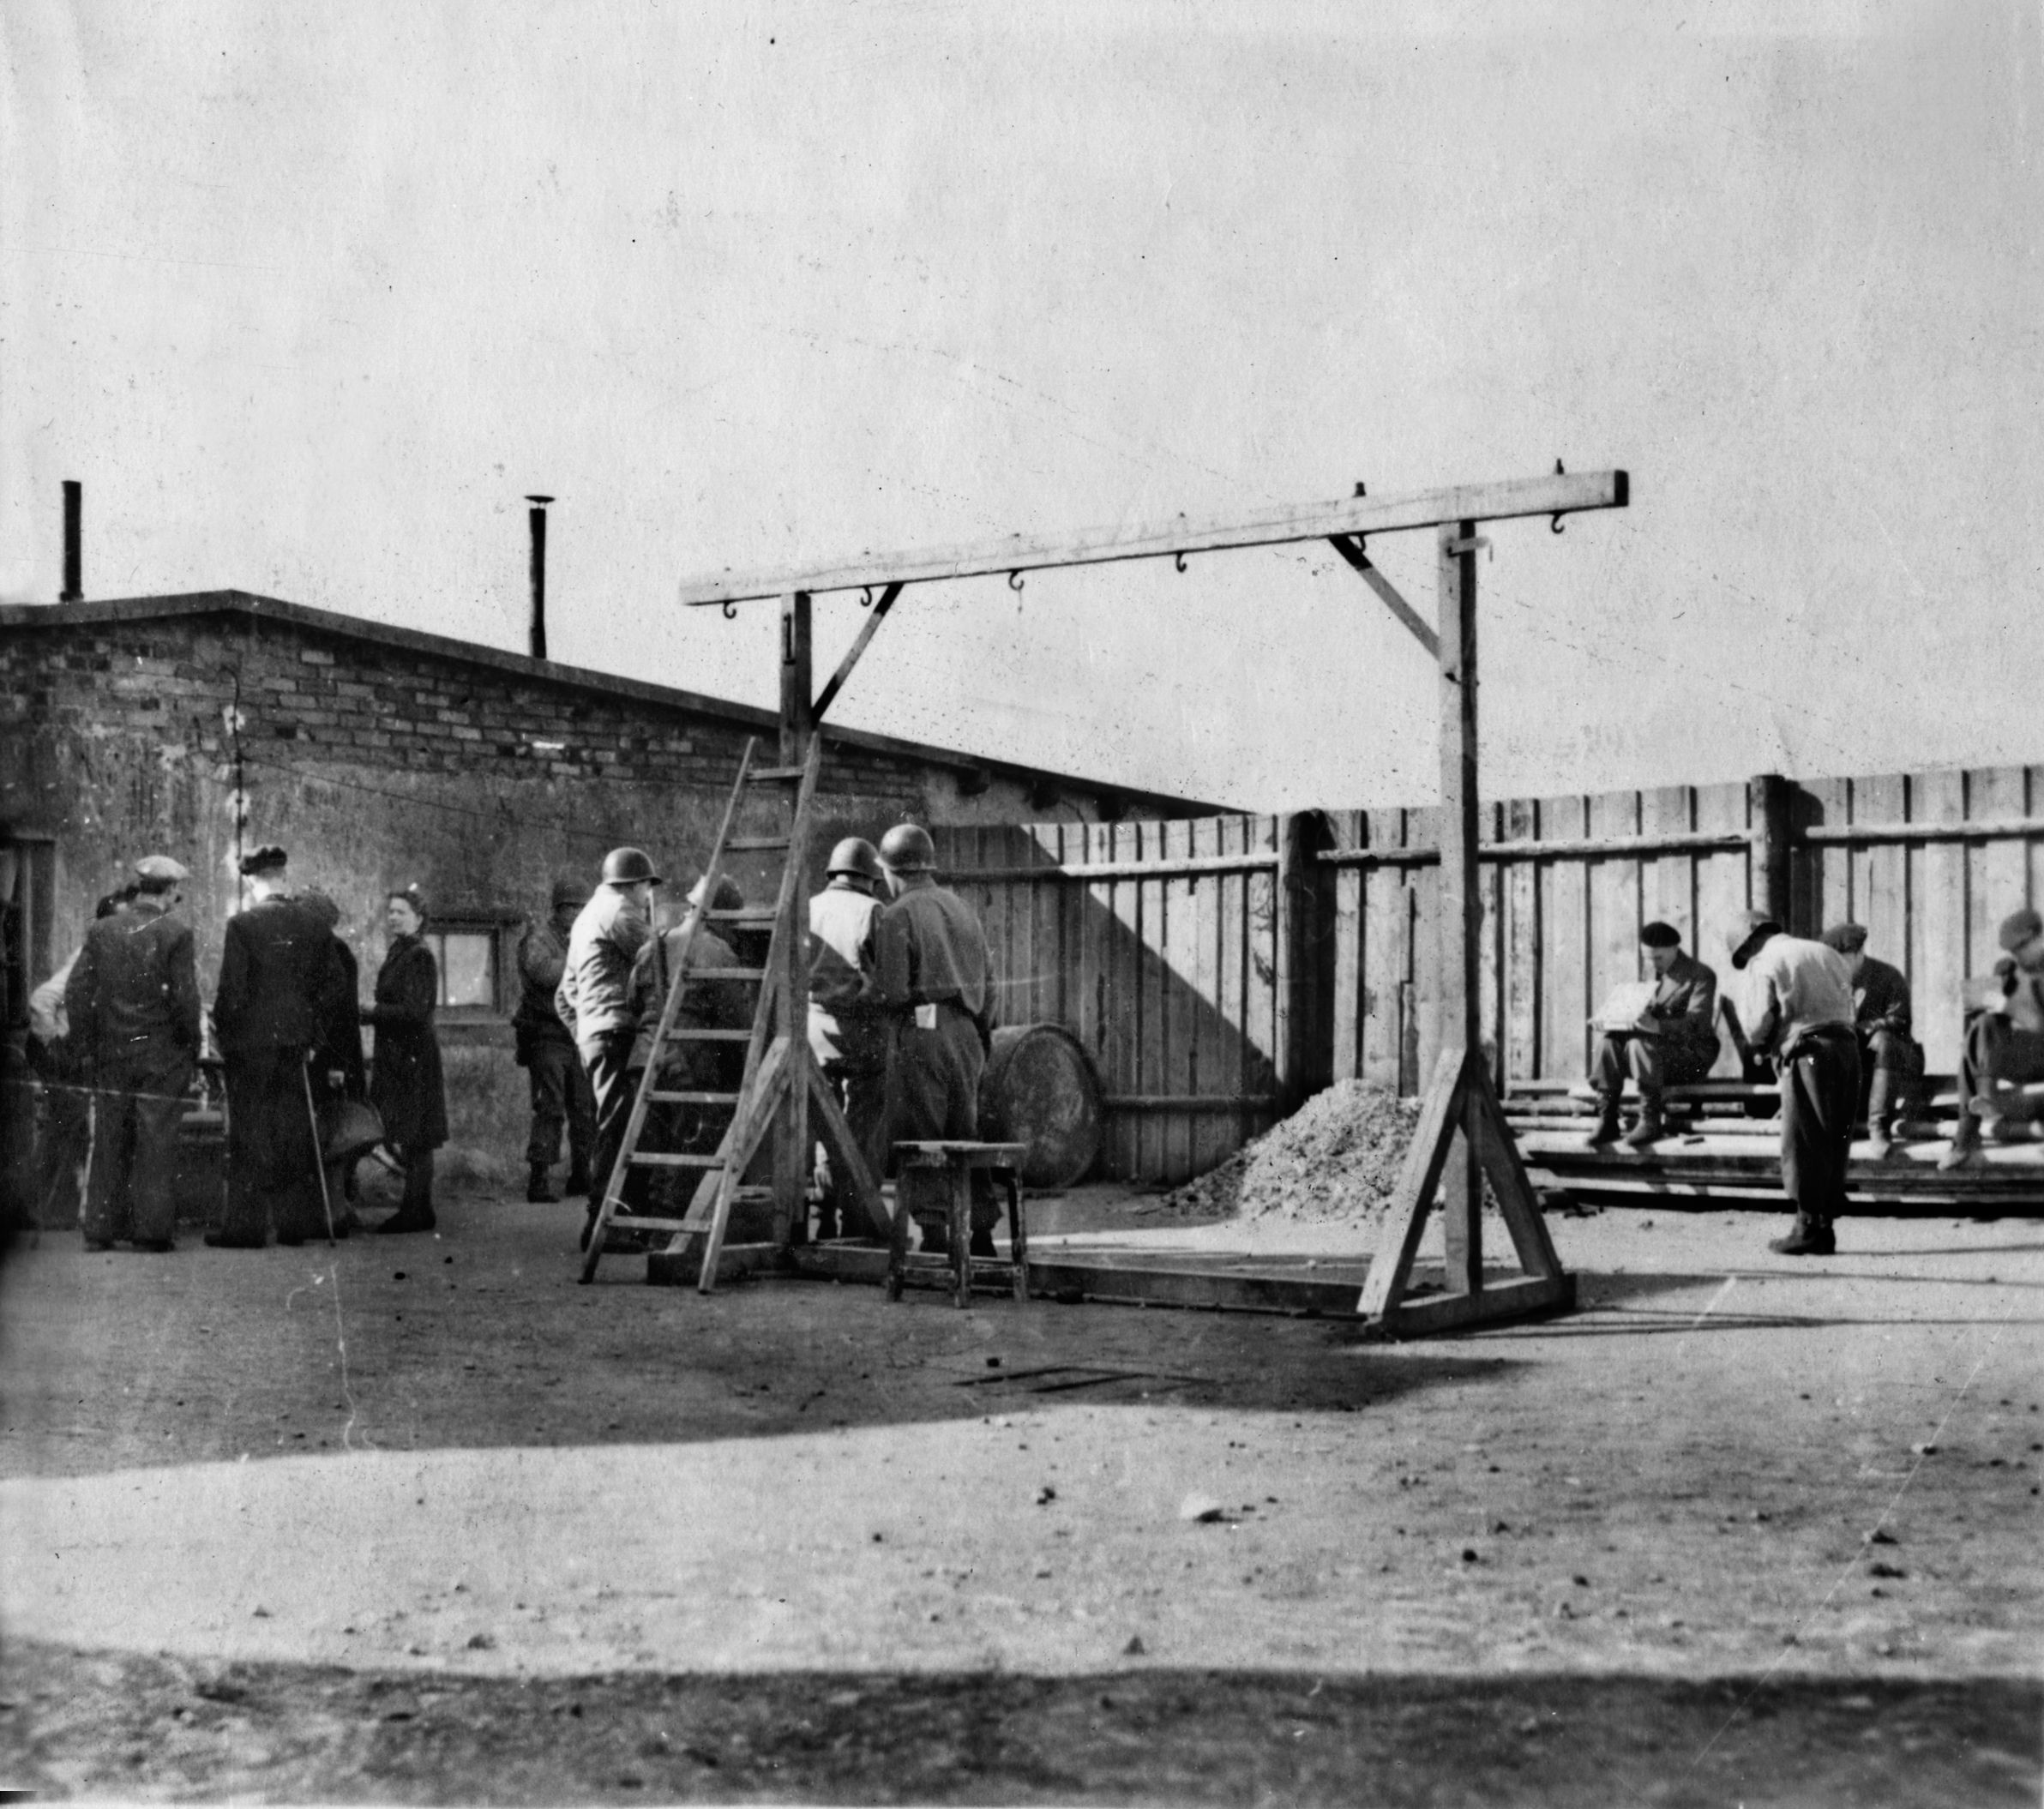 A group of GIs inspects the portable gallows that were used to execute inmates who had committed crimes at Buchenwald, such as stealing, sabotage, and attempting to escape. 